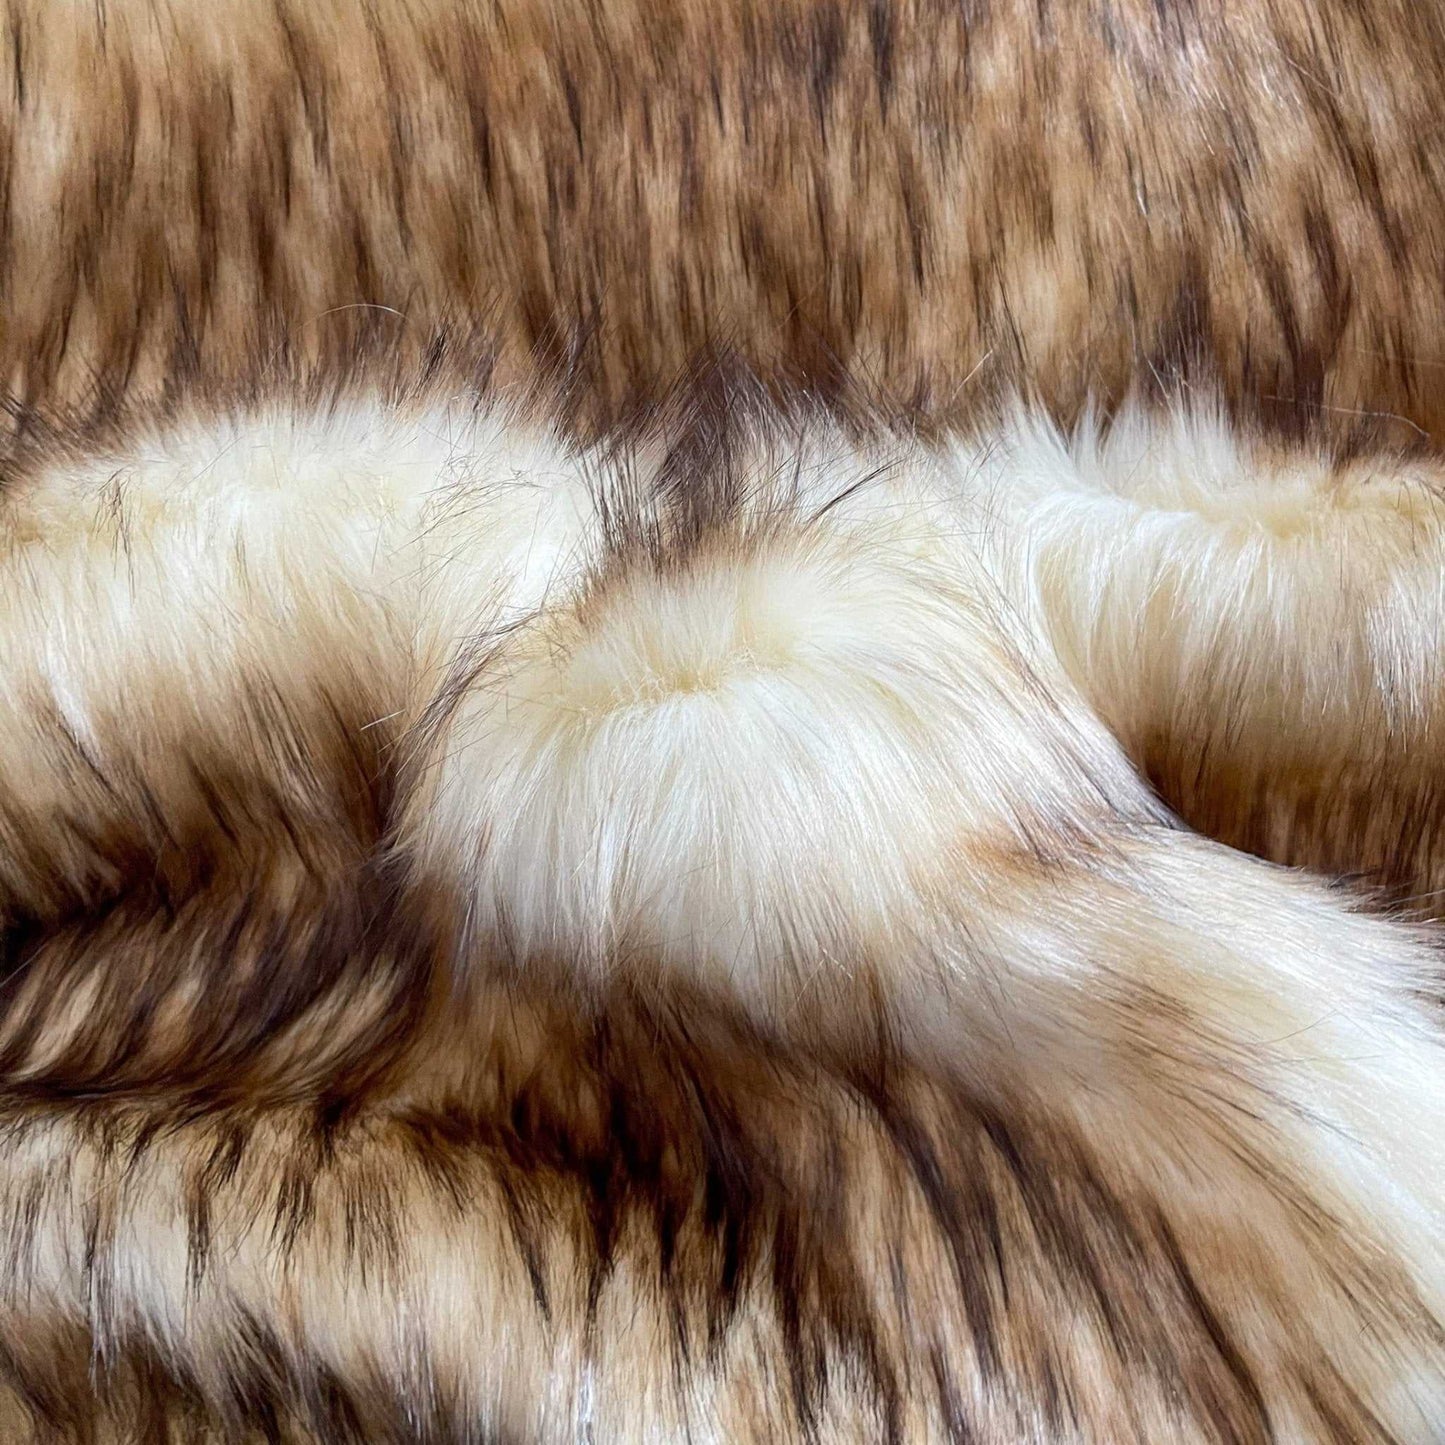 Creme Brulee Faux Fur Fabric by the Yard or Meter | Cream, Tan, Brown Pompom, Arts & Crafts, Decor, Costume Faux Fur Fabric 3 $ Buttons & Beans Co.